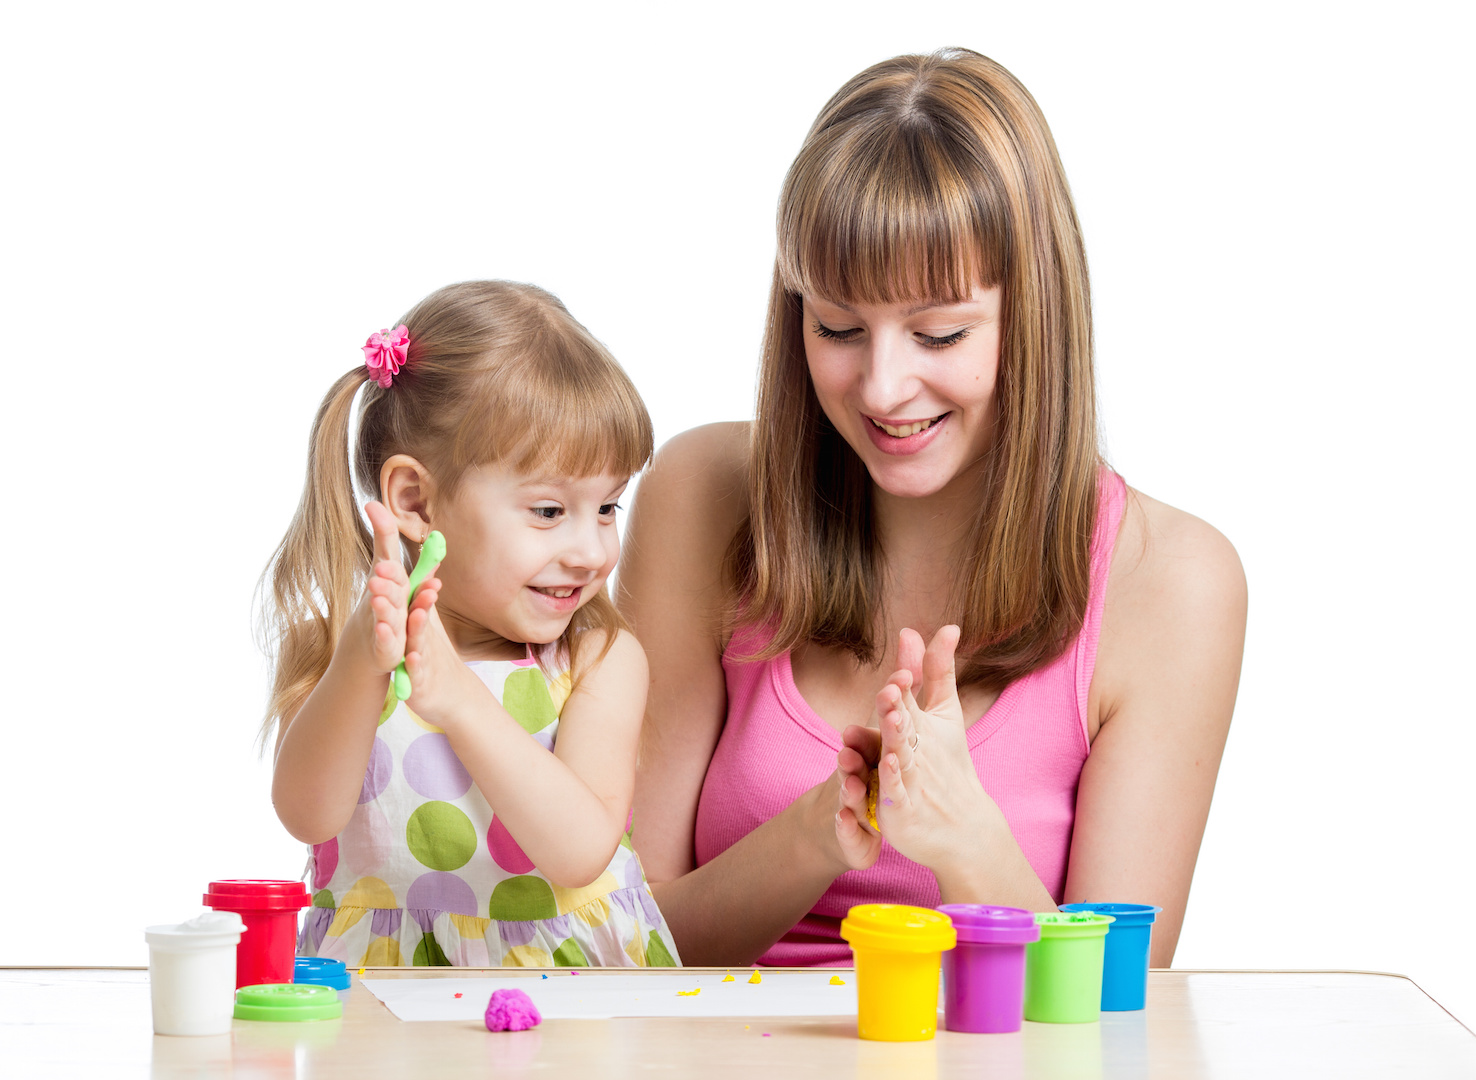 kid girl and mother playing colorful clay toy.